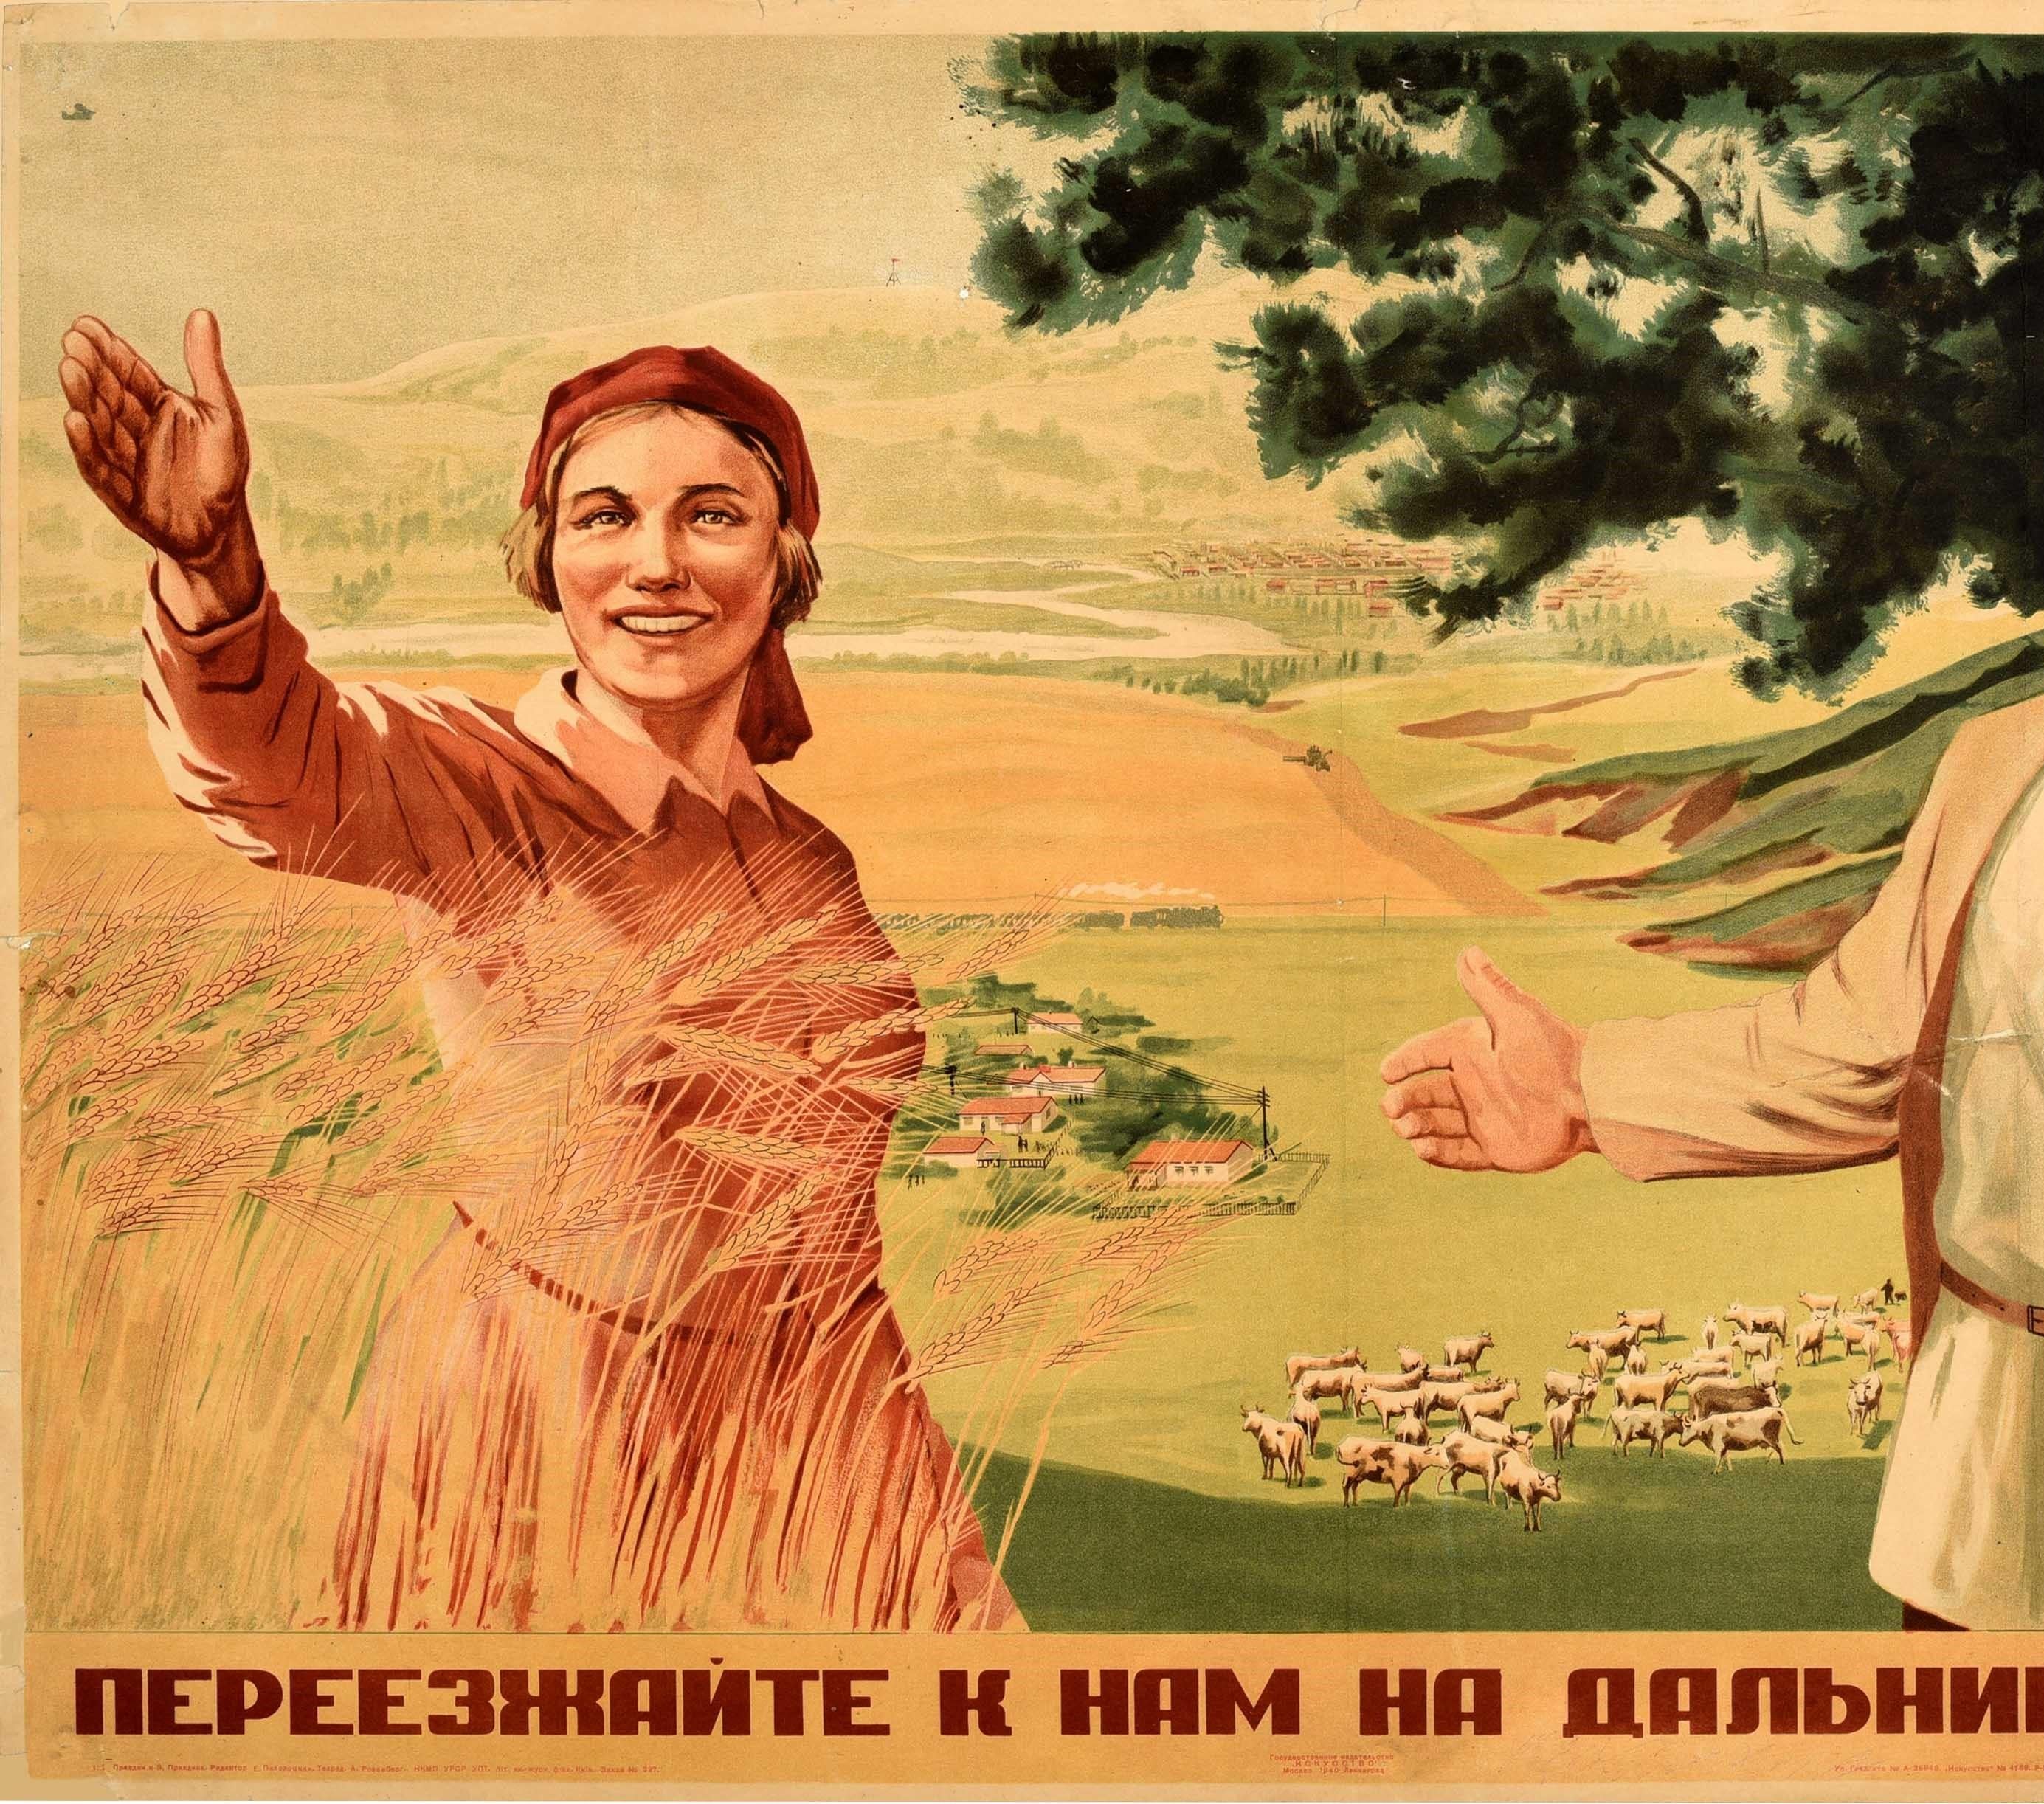 Original vintage Soviet propaganda poster - Move to the Far East With Us / ??????????? ? ??? ?? ??????? ??????! - featuring a lady behind wheat and a man framed by a tree welcoming and showing the viewer the land available for cattle and crop